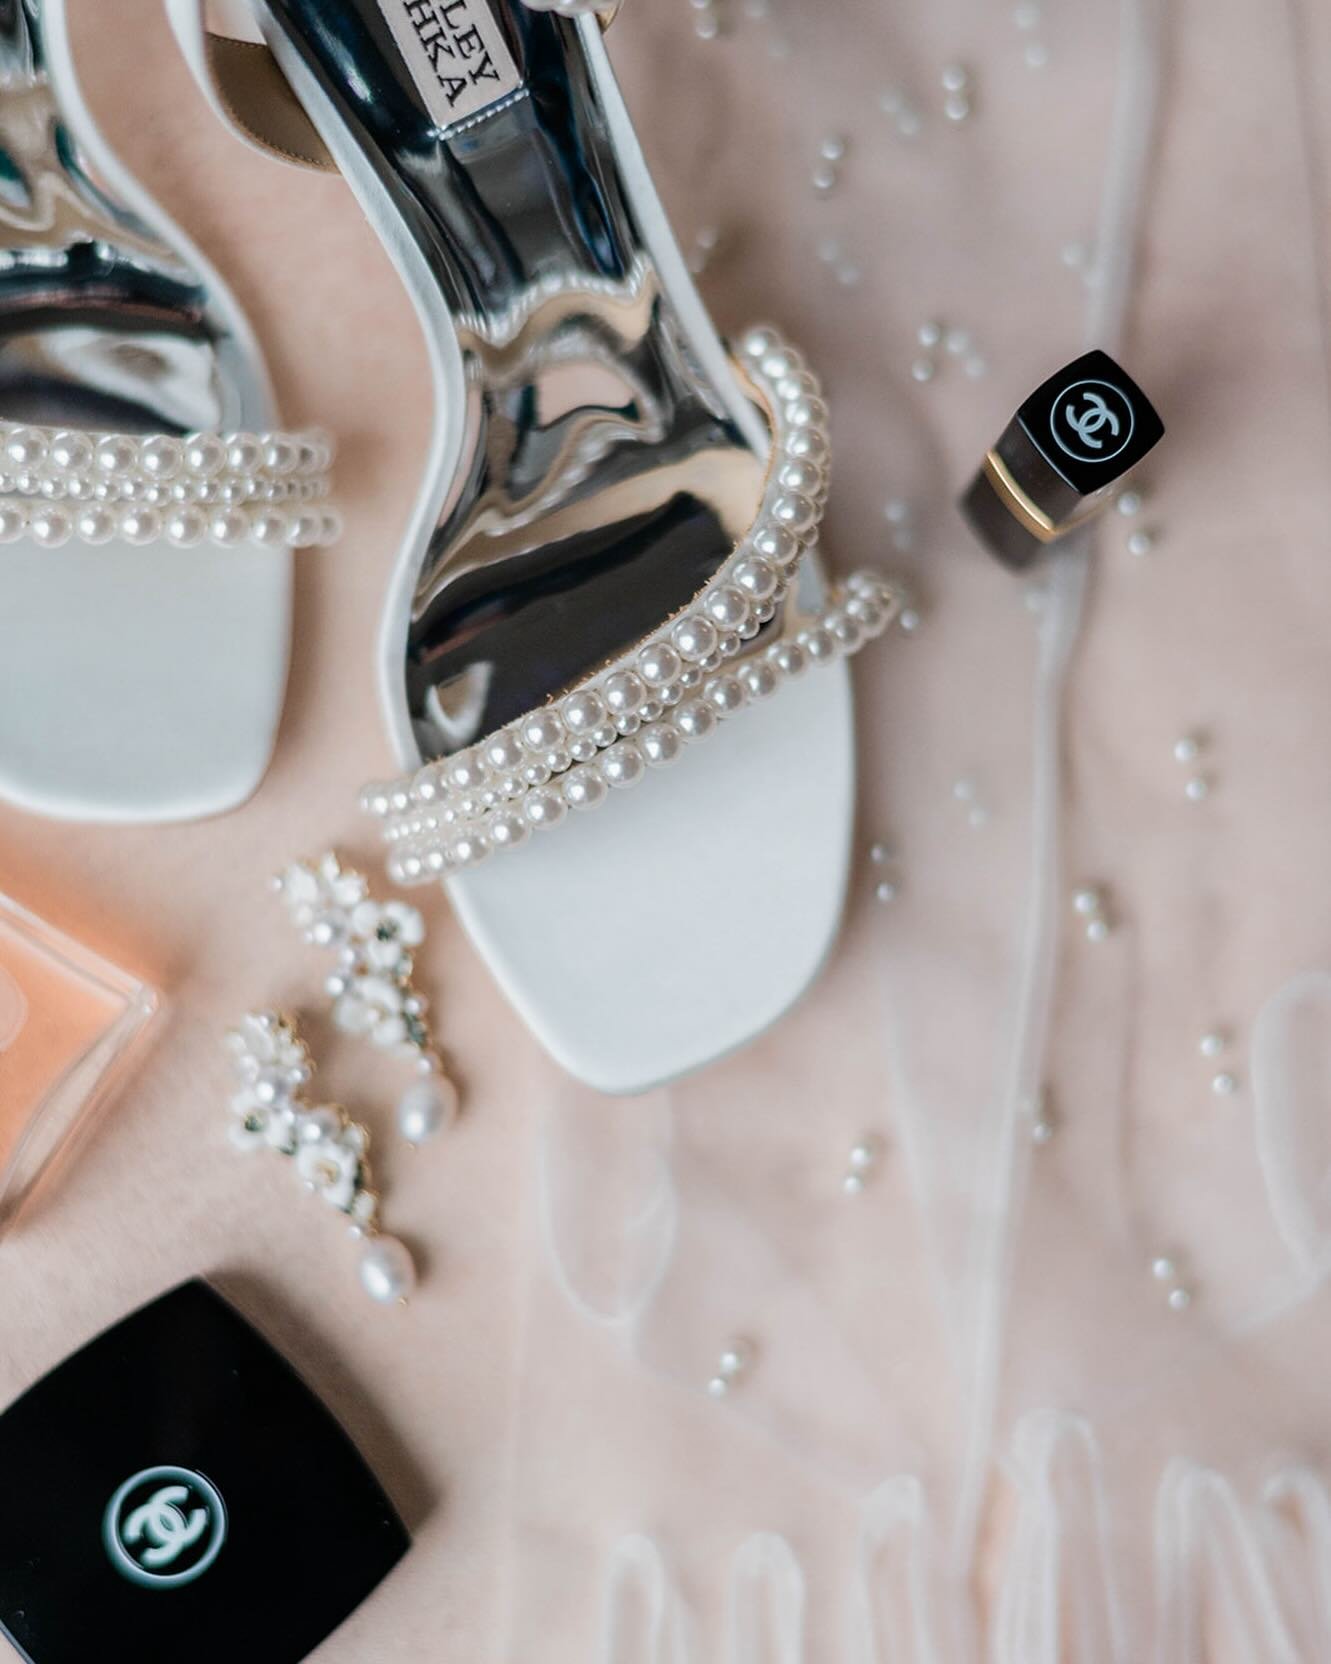 Pearls &amp; CHANEL&hellip; Always classic 

@badgleymischka shoes, @oliveandpiper earrings &amp; @untamedpetals pearl gloves 

Planning + Education: @kimtrangphoto / @maisiesnyderphoto
Design + Planning @elevatedeventsbysm
Venue: @wireeventcenter
Fl